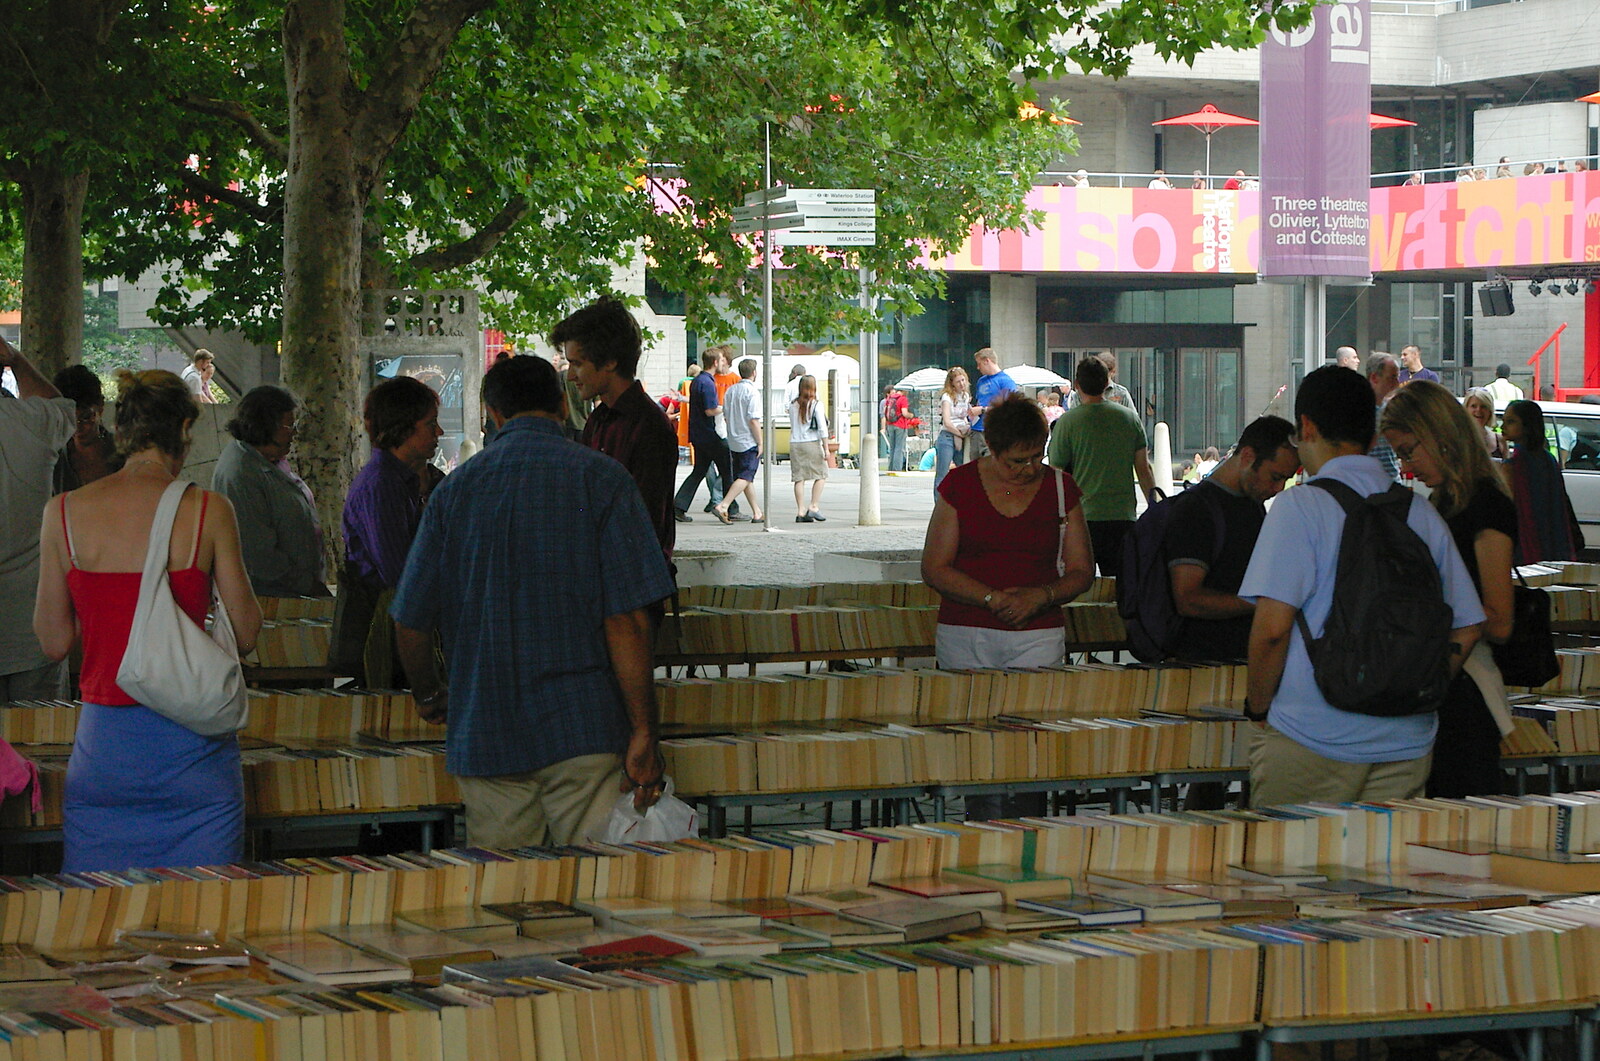 More books under the bridge from Borough Market and North Clapham Tapas, London - 23rd July 2005